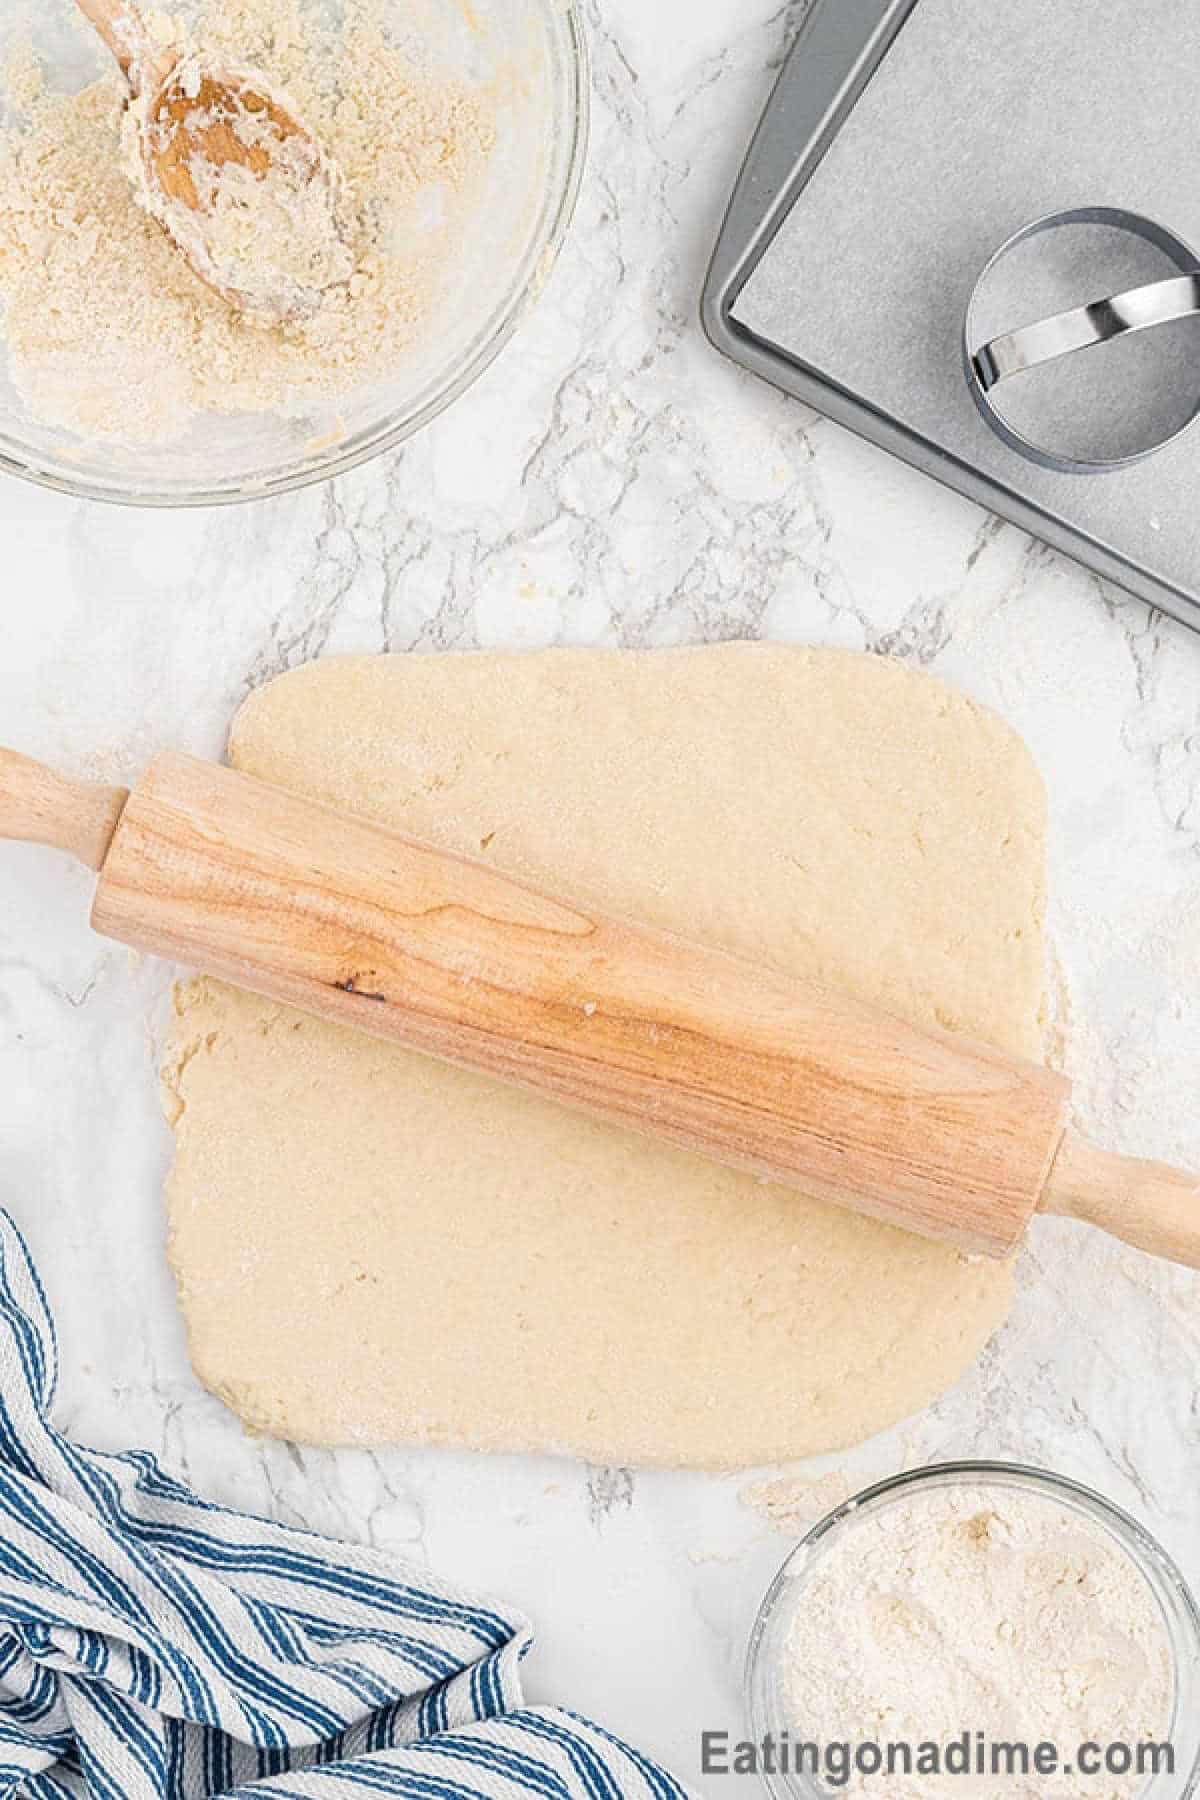 Rolling out the dough with a rolling pin